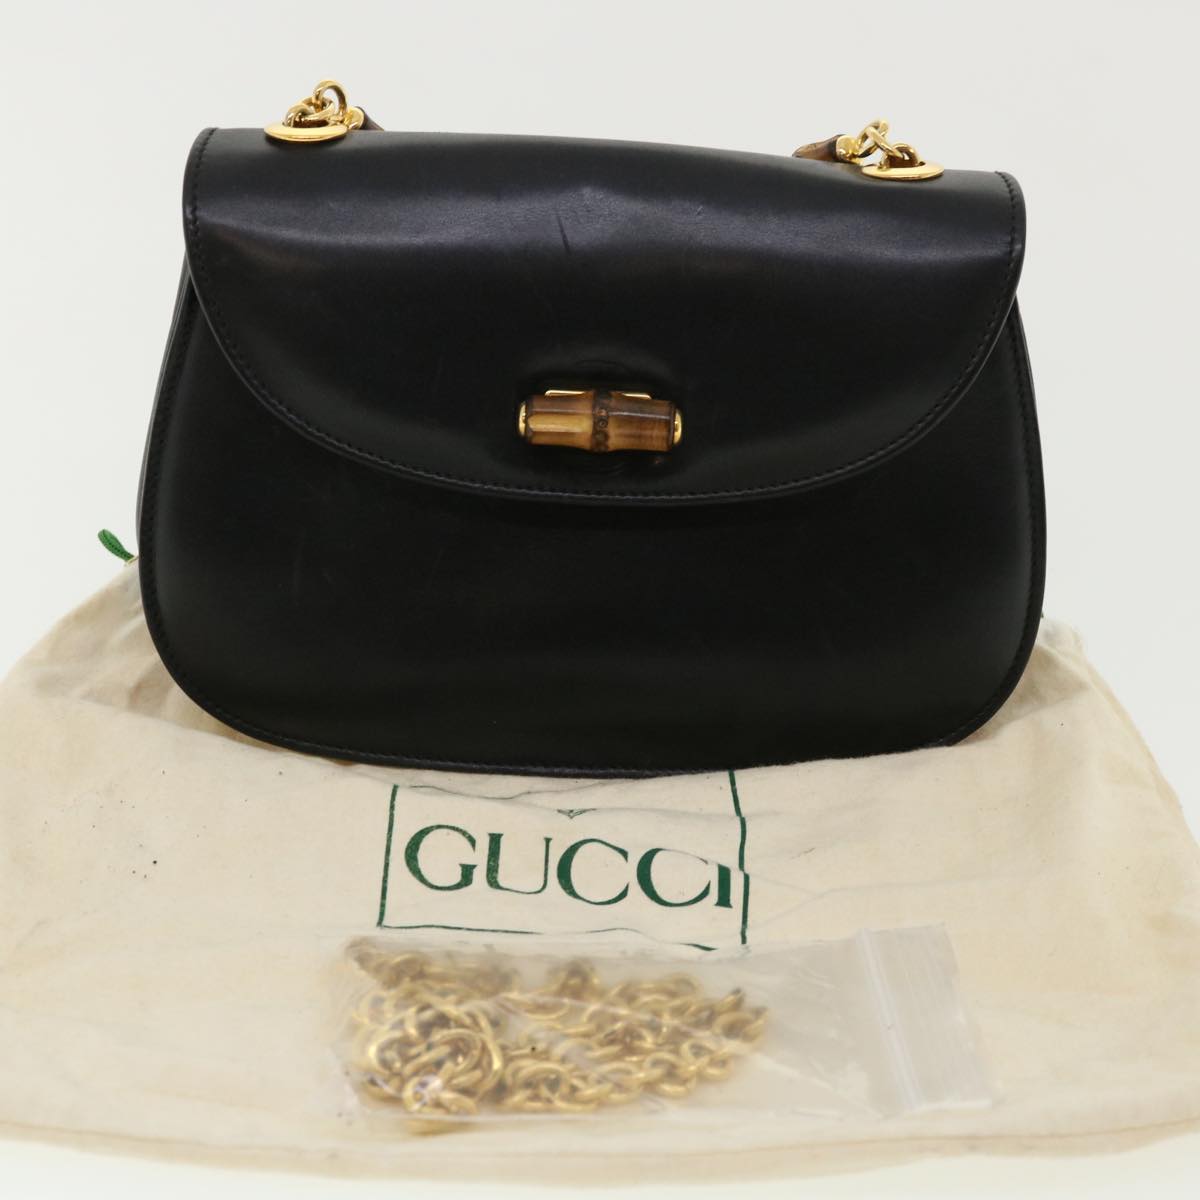 GUCCI Bamboo Chain Hand Bag Leather Black 0011151497 Auth am3810